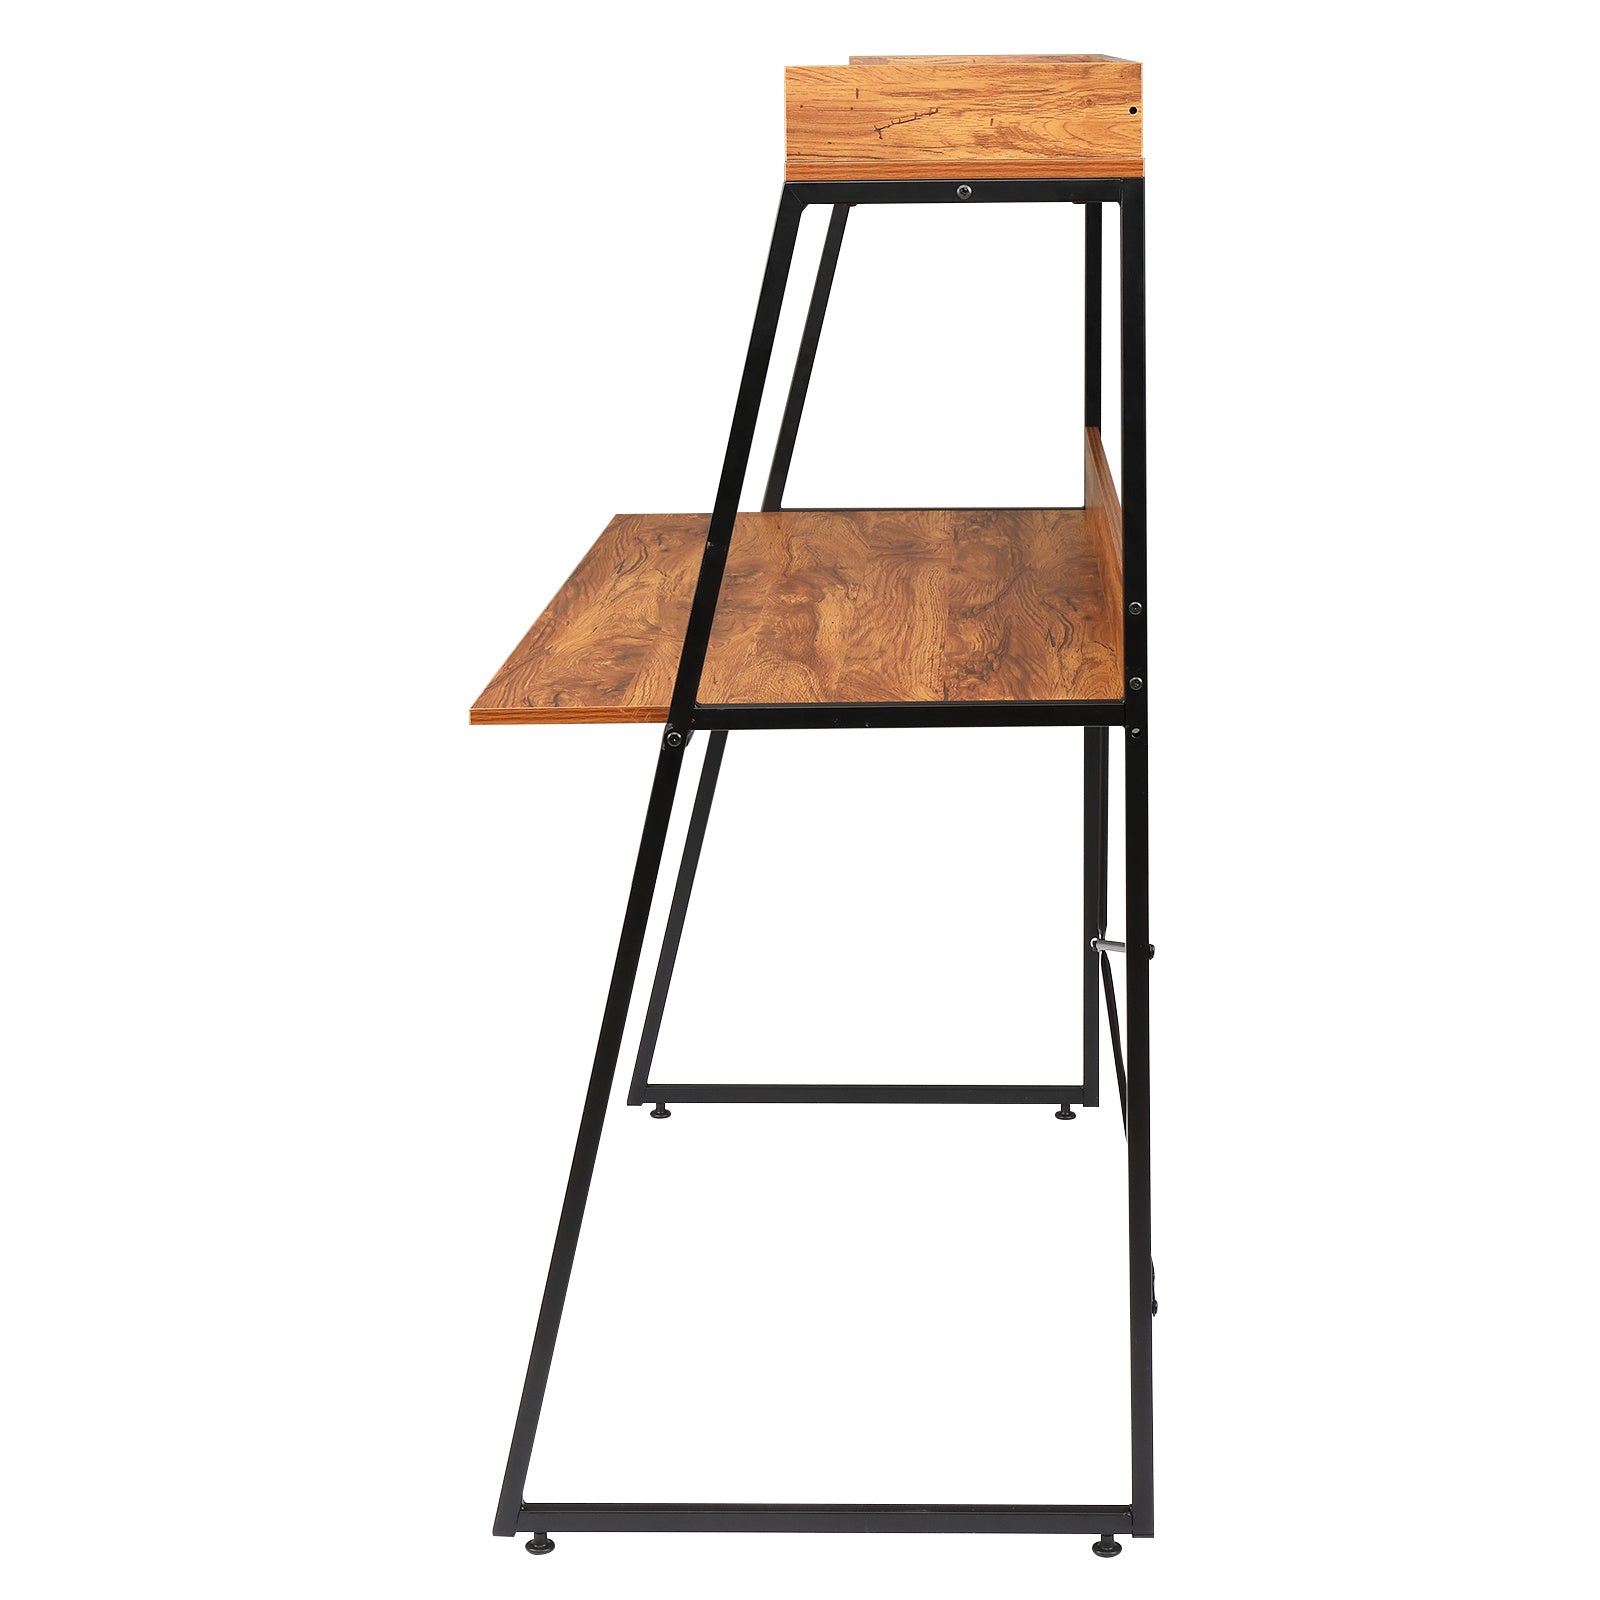 FCH Vintage Color 2-Tier Ladder Computer Desk with Storage Bookshelf - Modern Writing Table for Office and Home RT